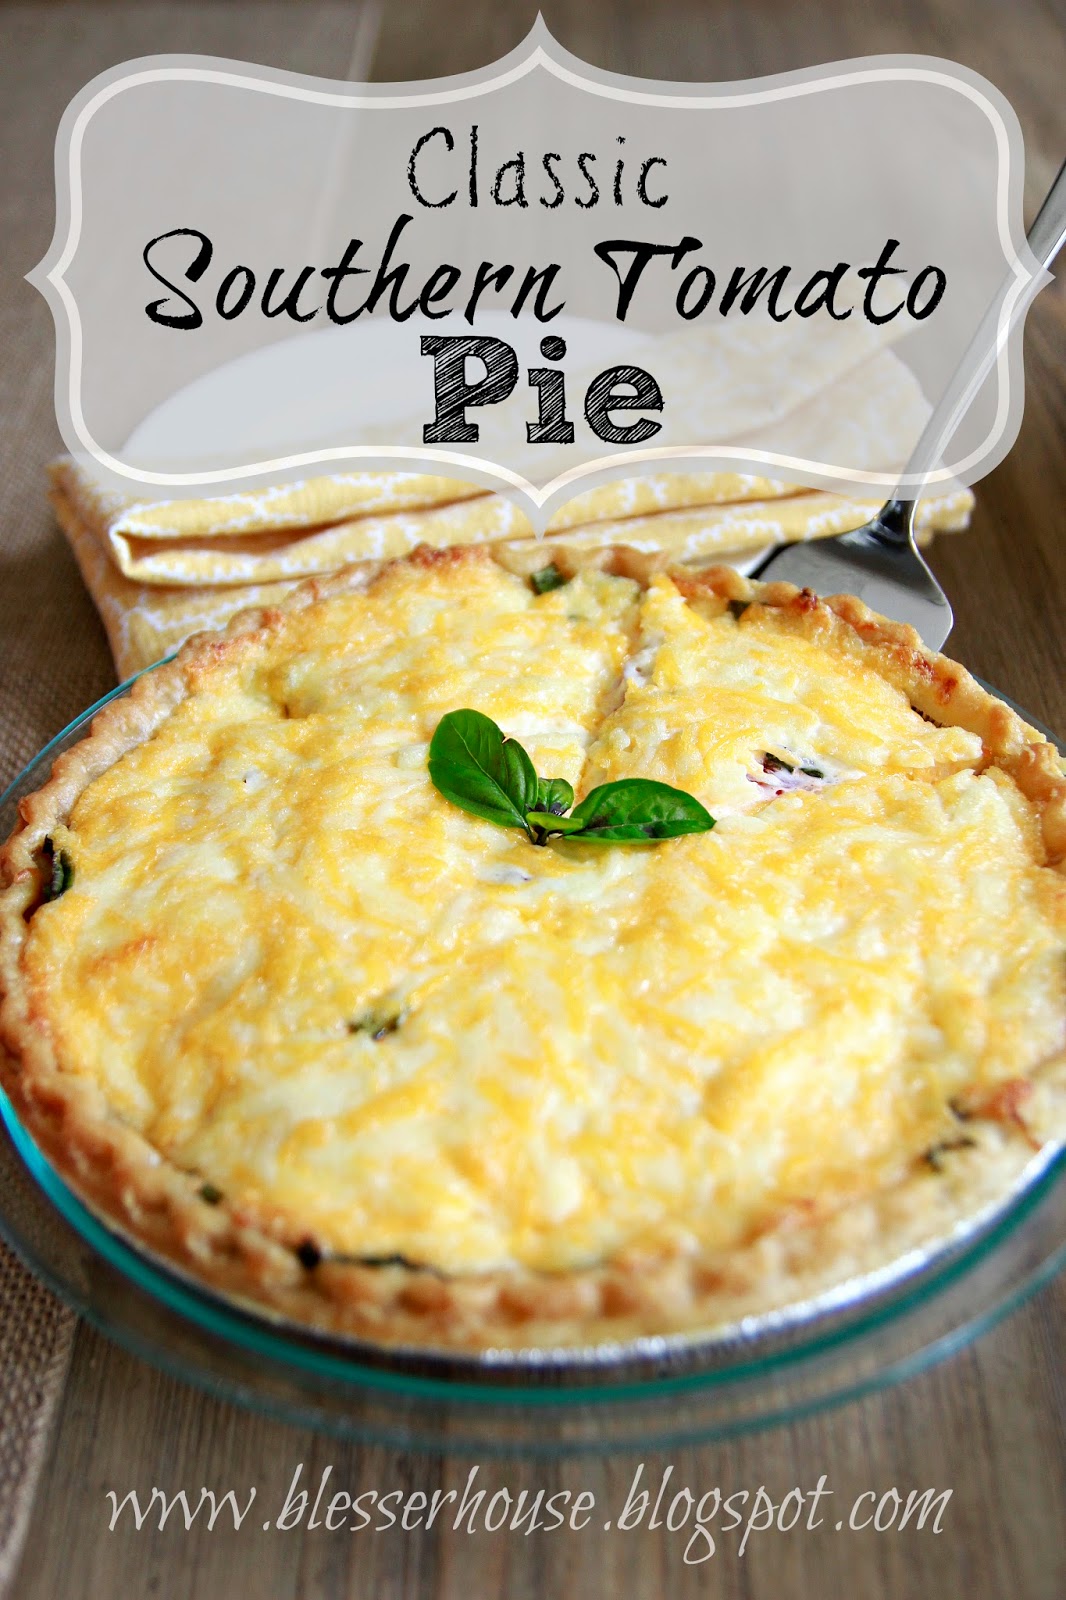 Classic Southern Tomato Pie - Bless'er House